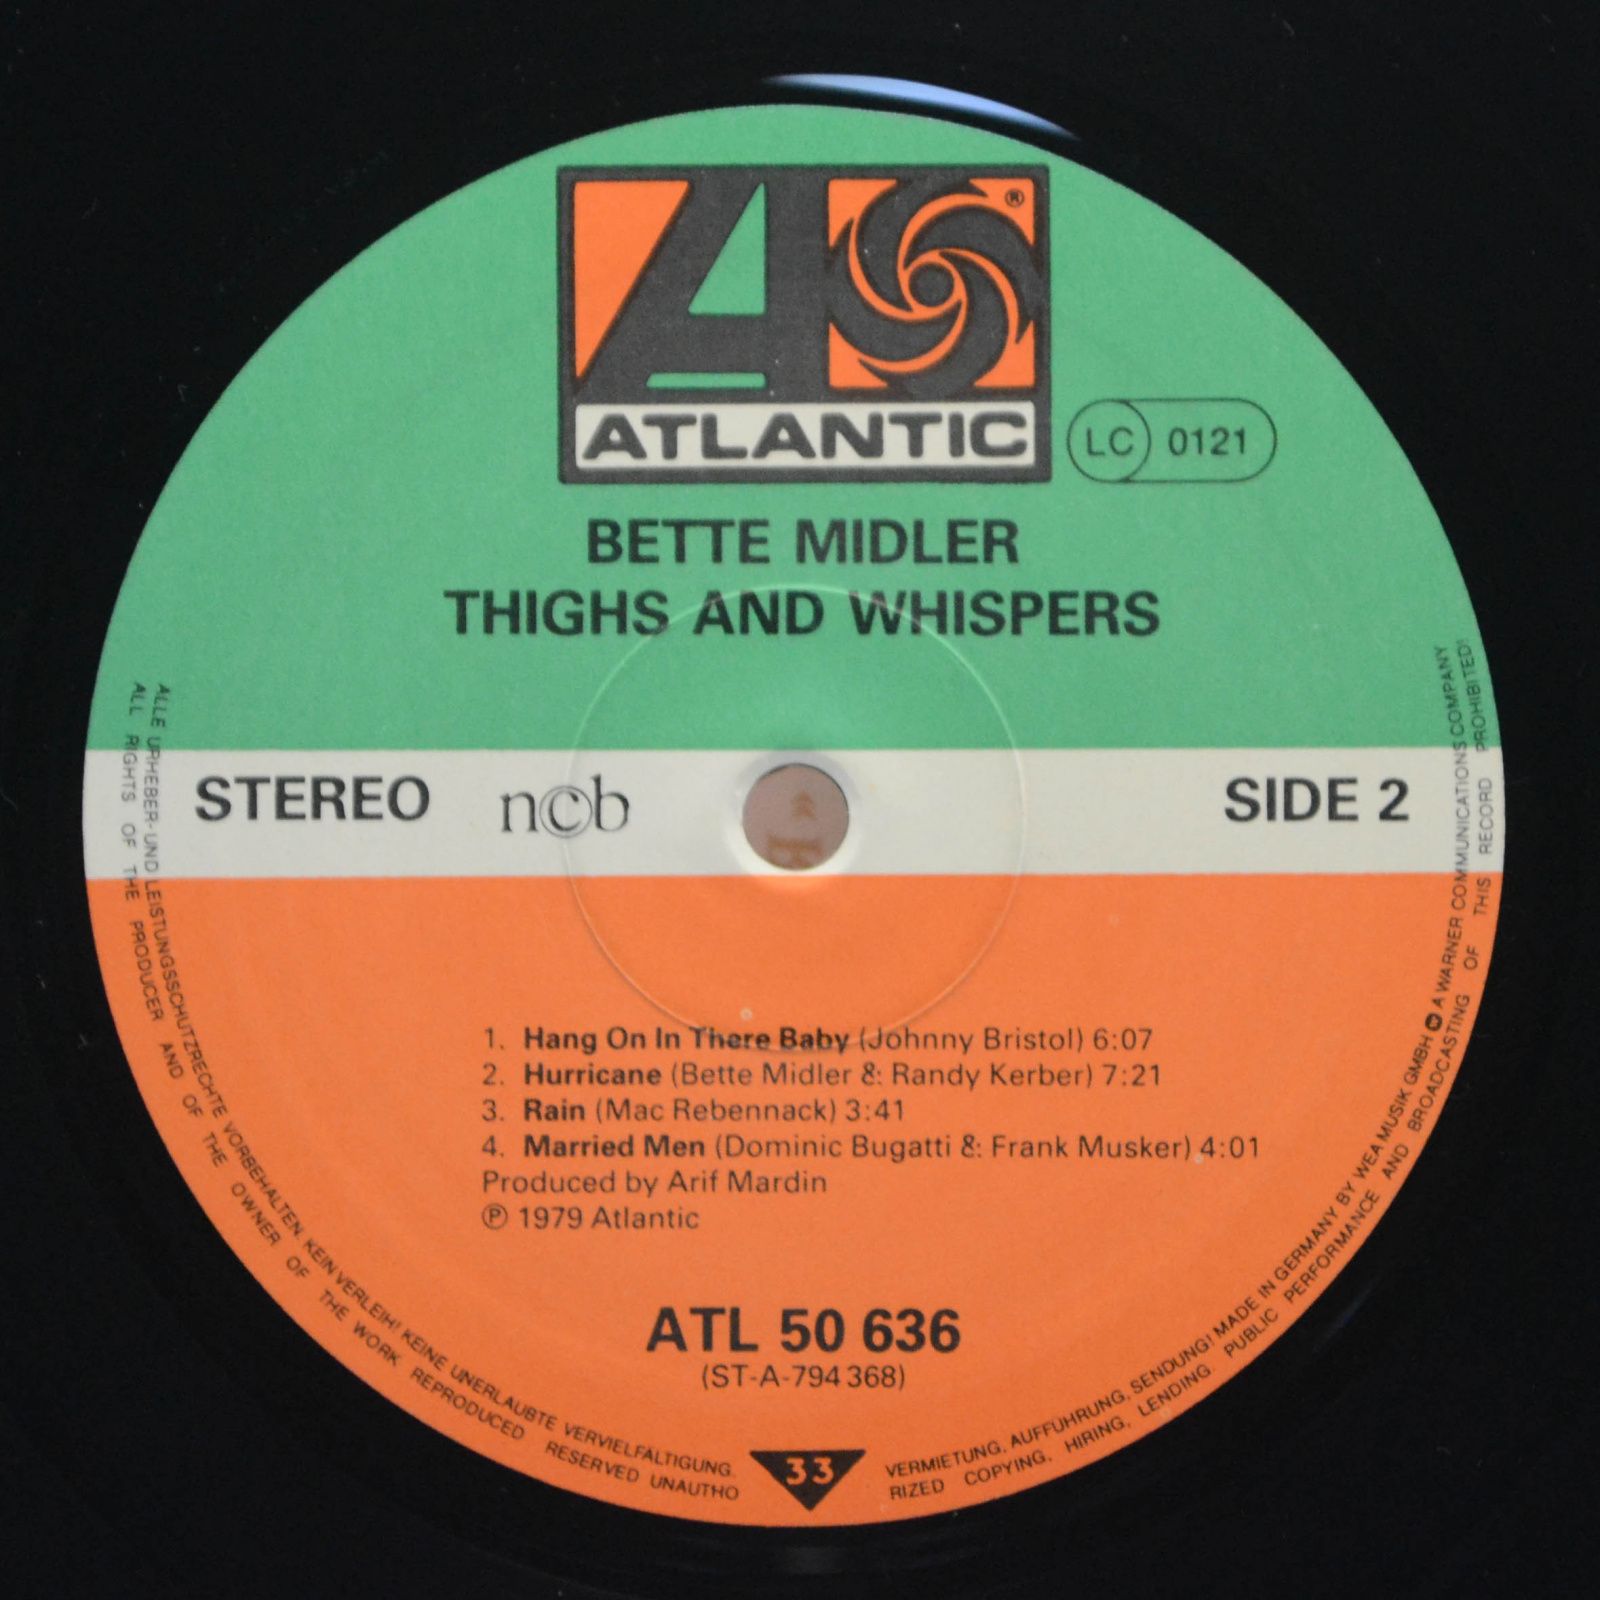 Bette Midler — Thighs And Whispers, 1979